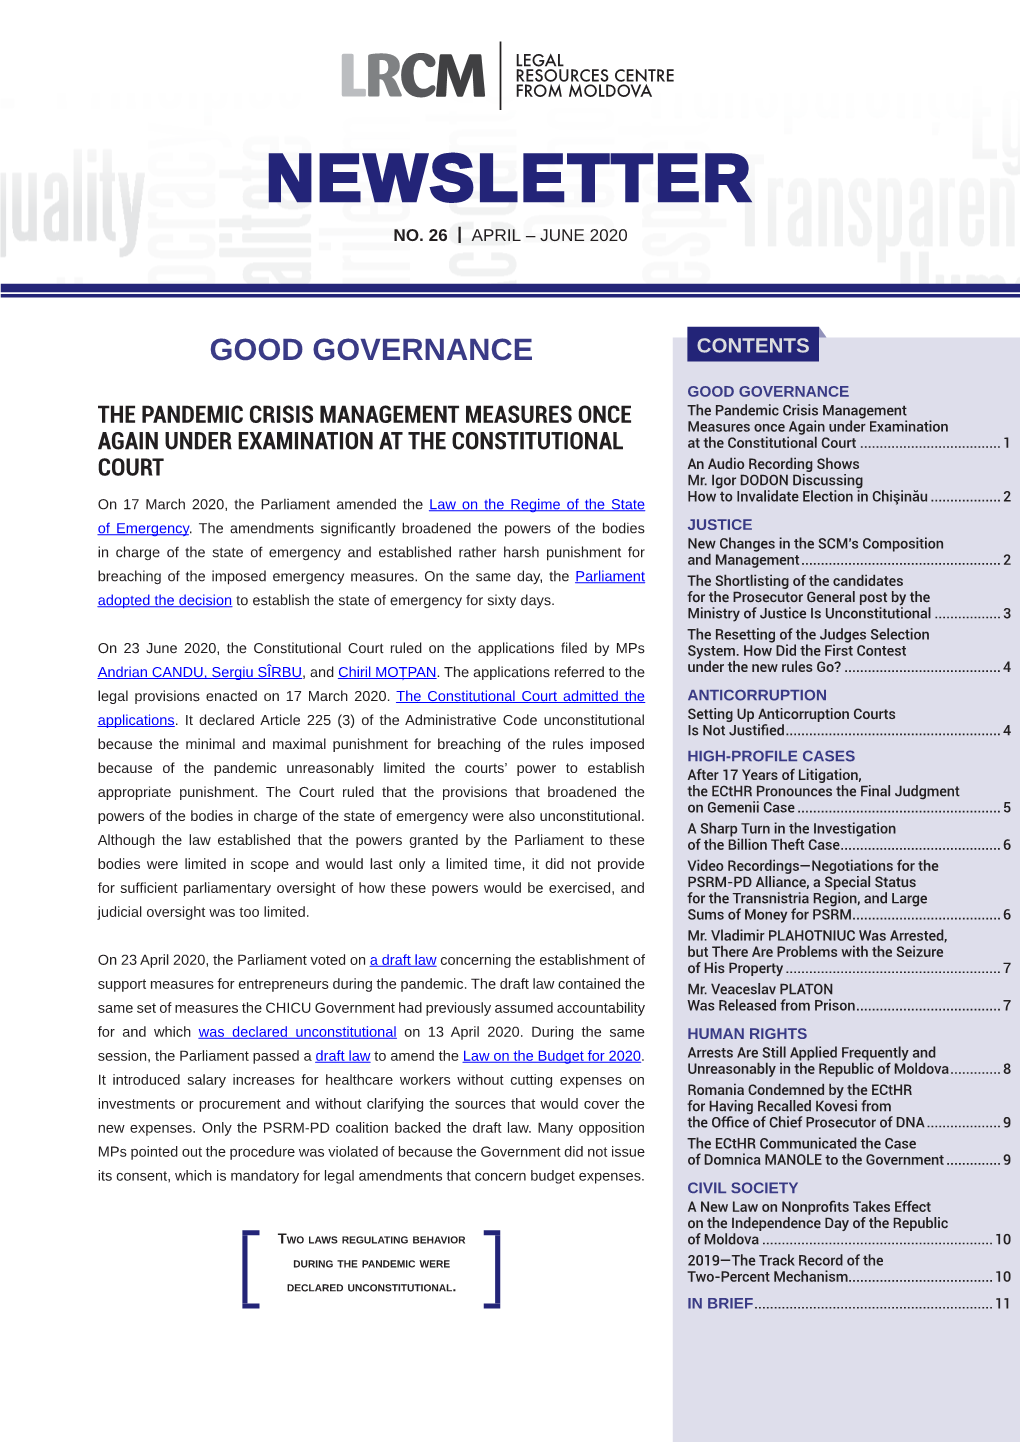 Good Governance Contents